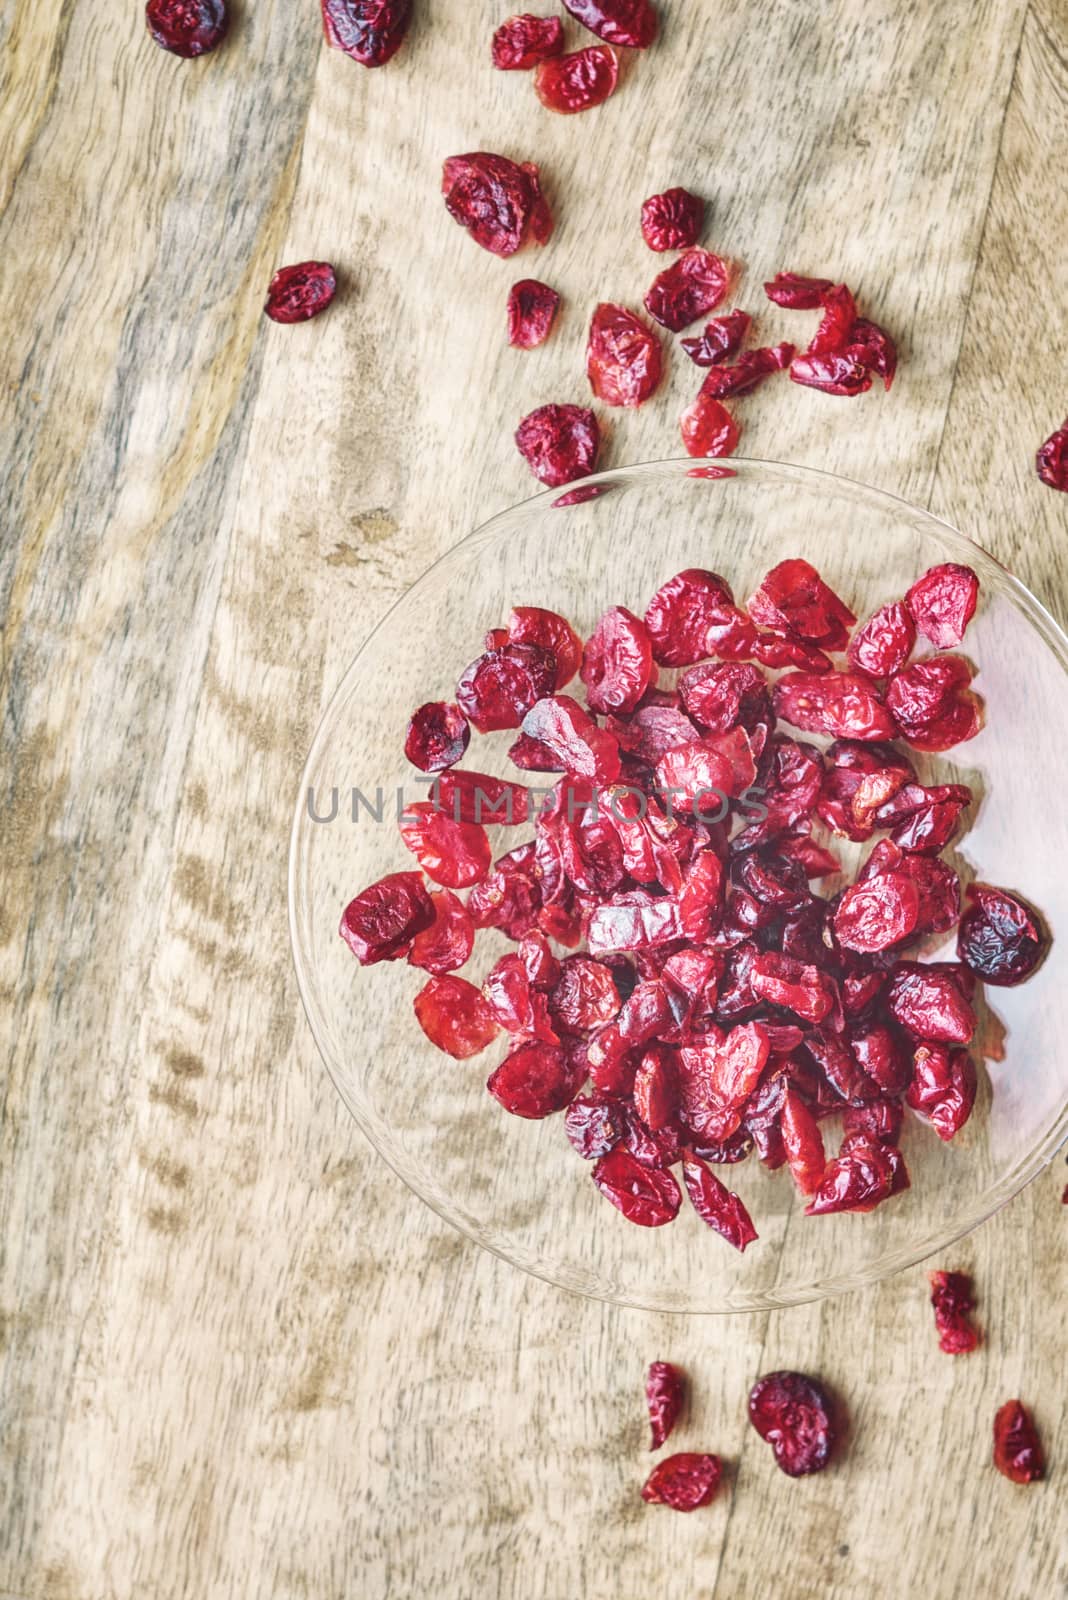 Dried cranberries in the glass bowl on the wooden table